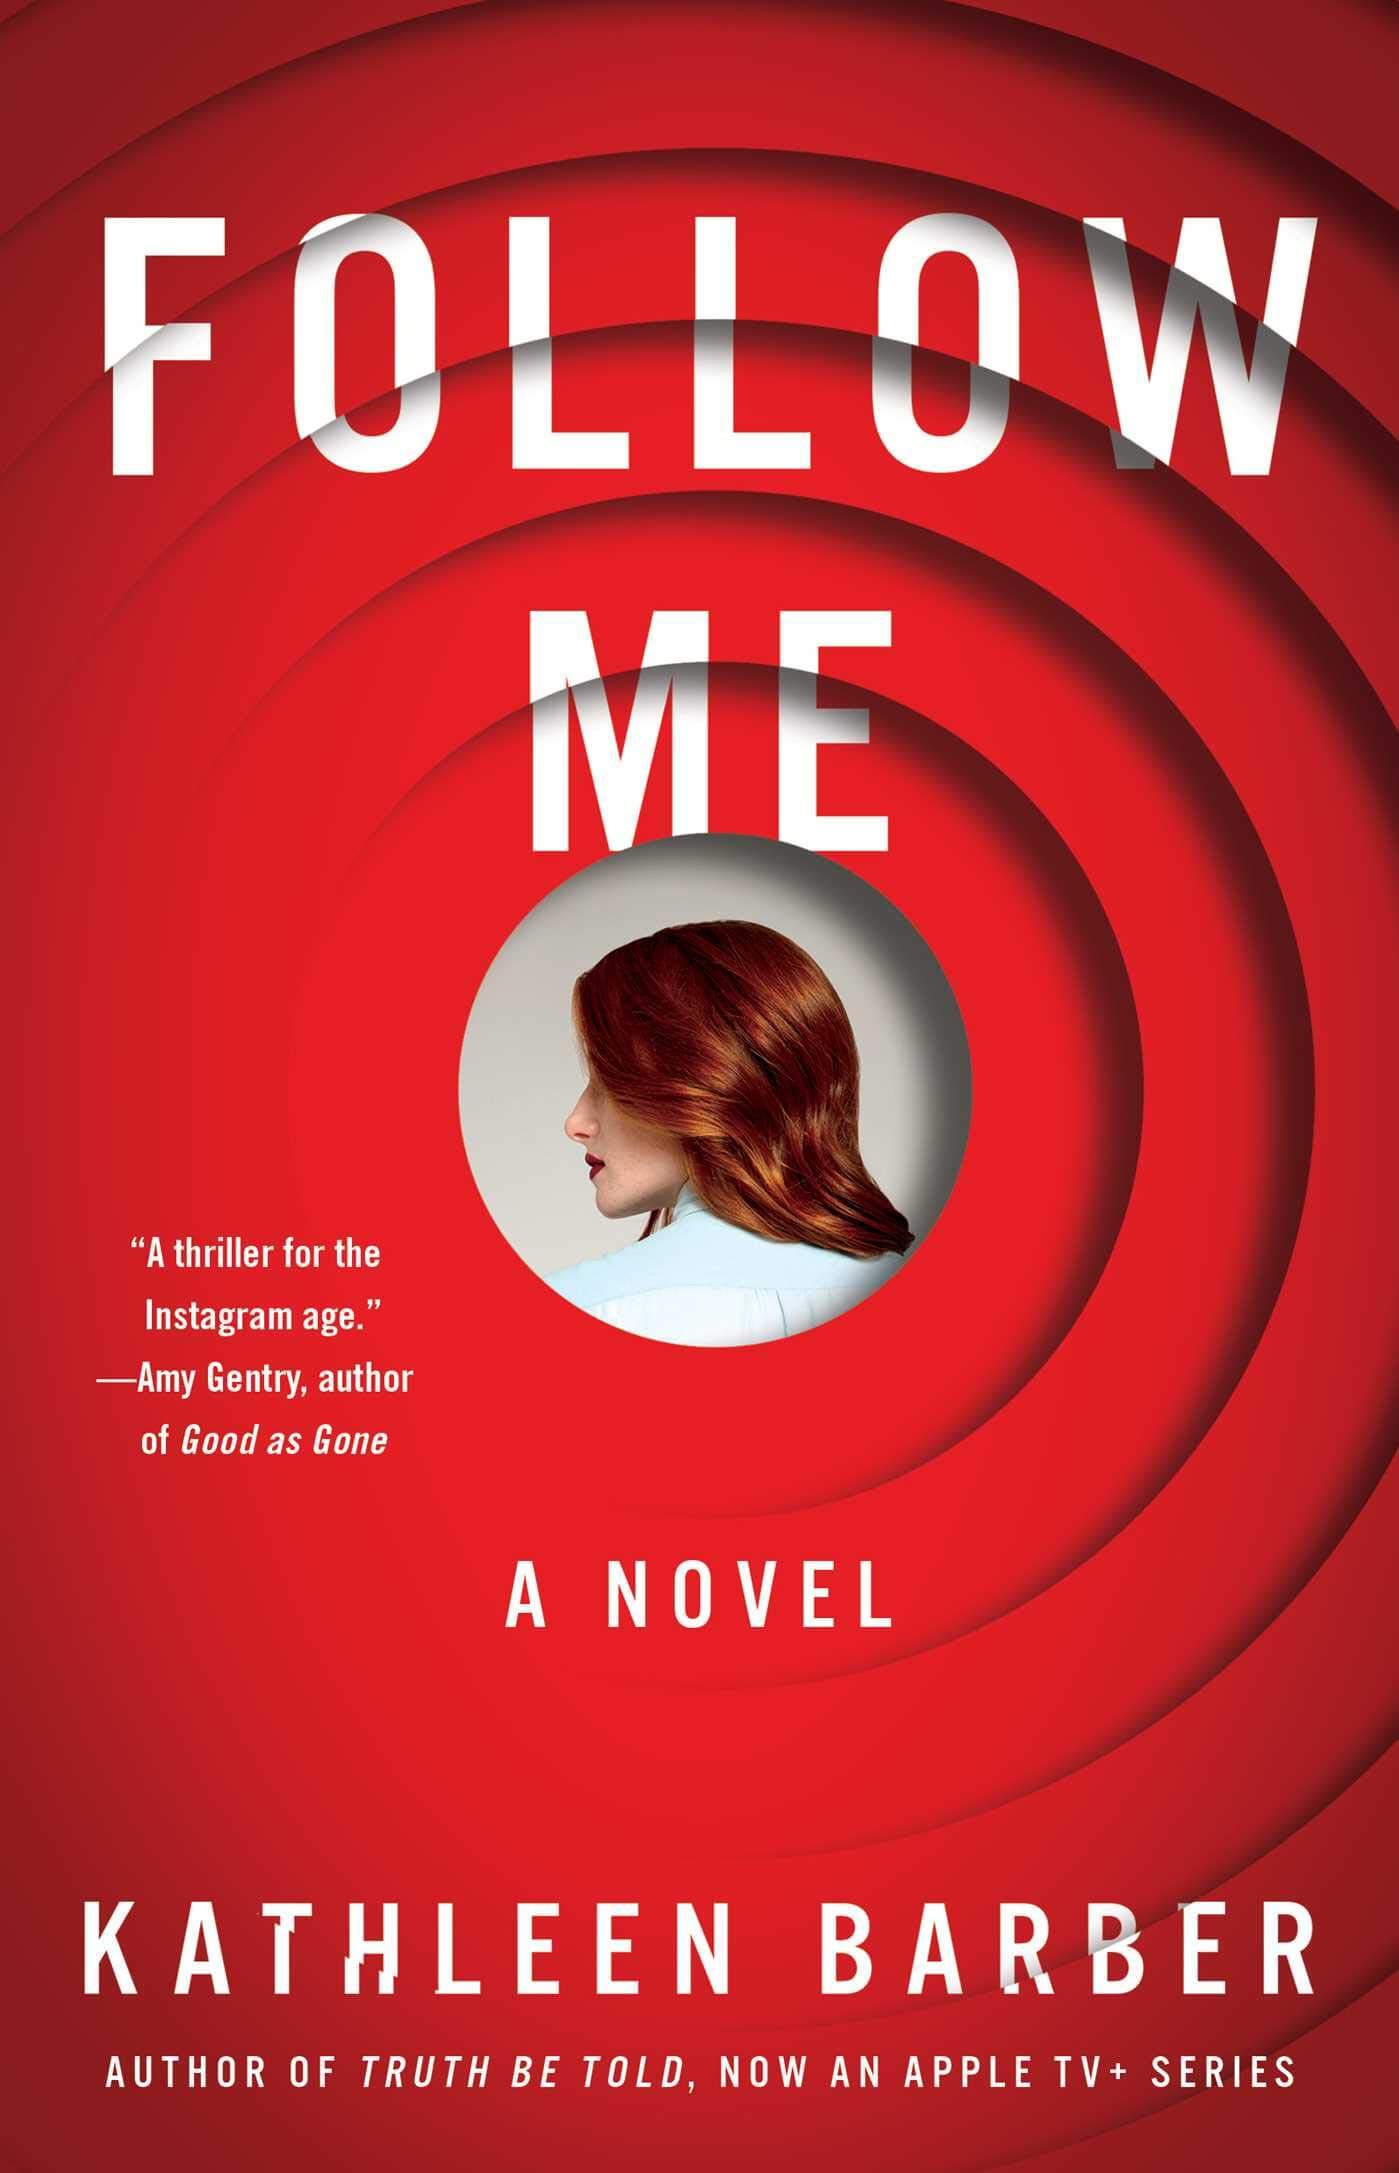 Cover of Follow Me by Kathleen Barber